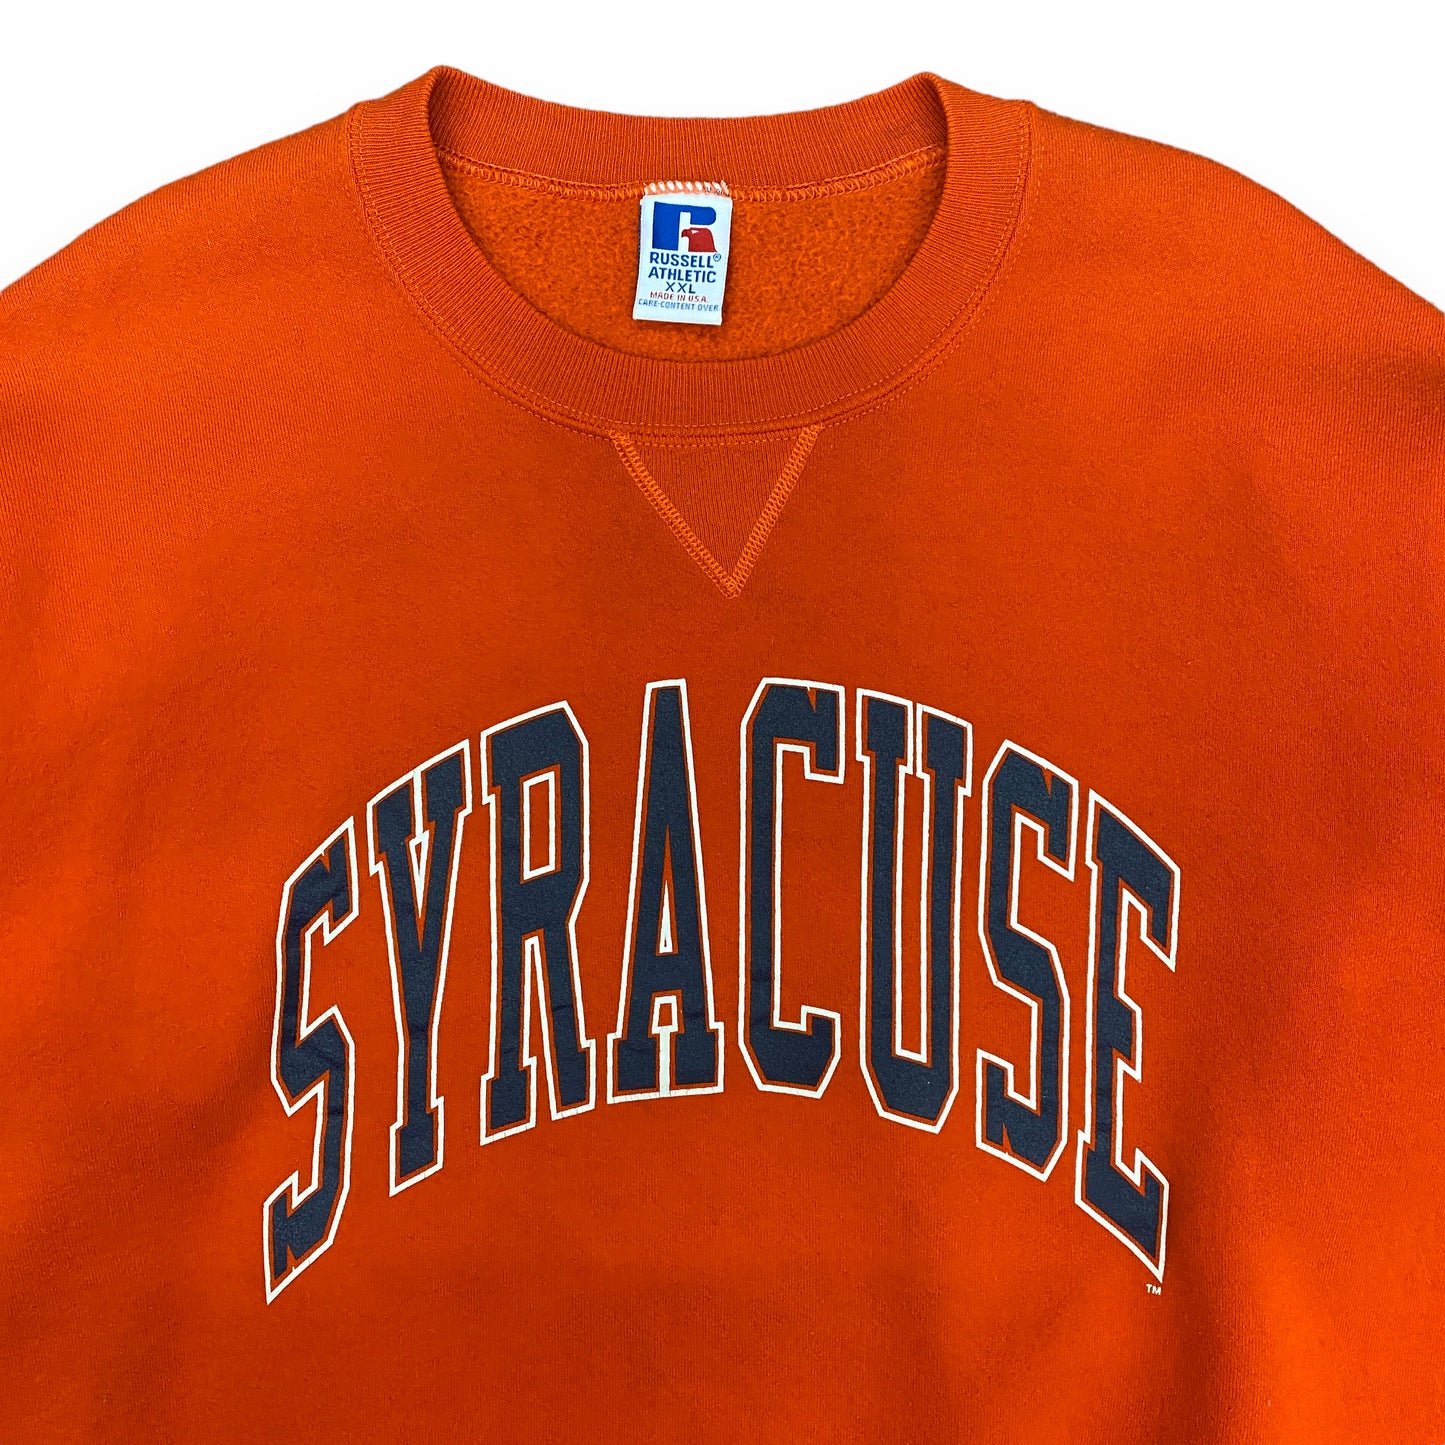 1990s Russell Athletic Syracuse University Spellout Crewneck - Size XXL (Fits XL)